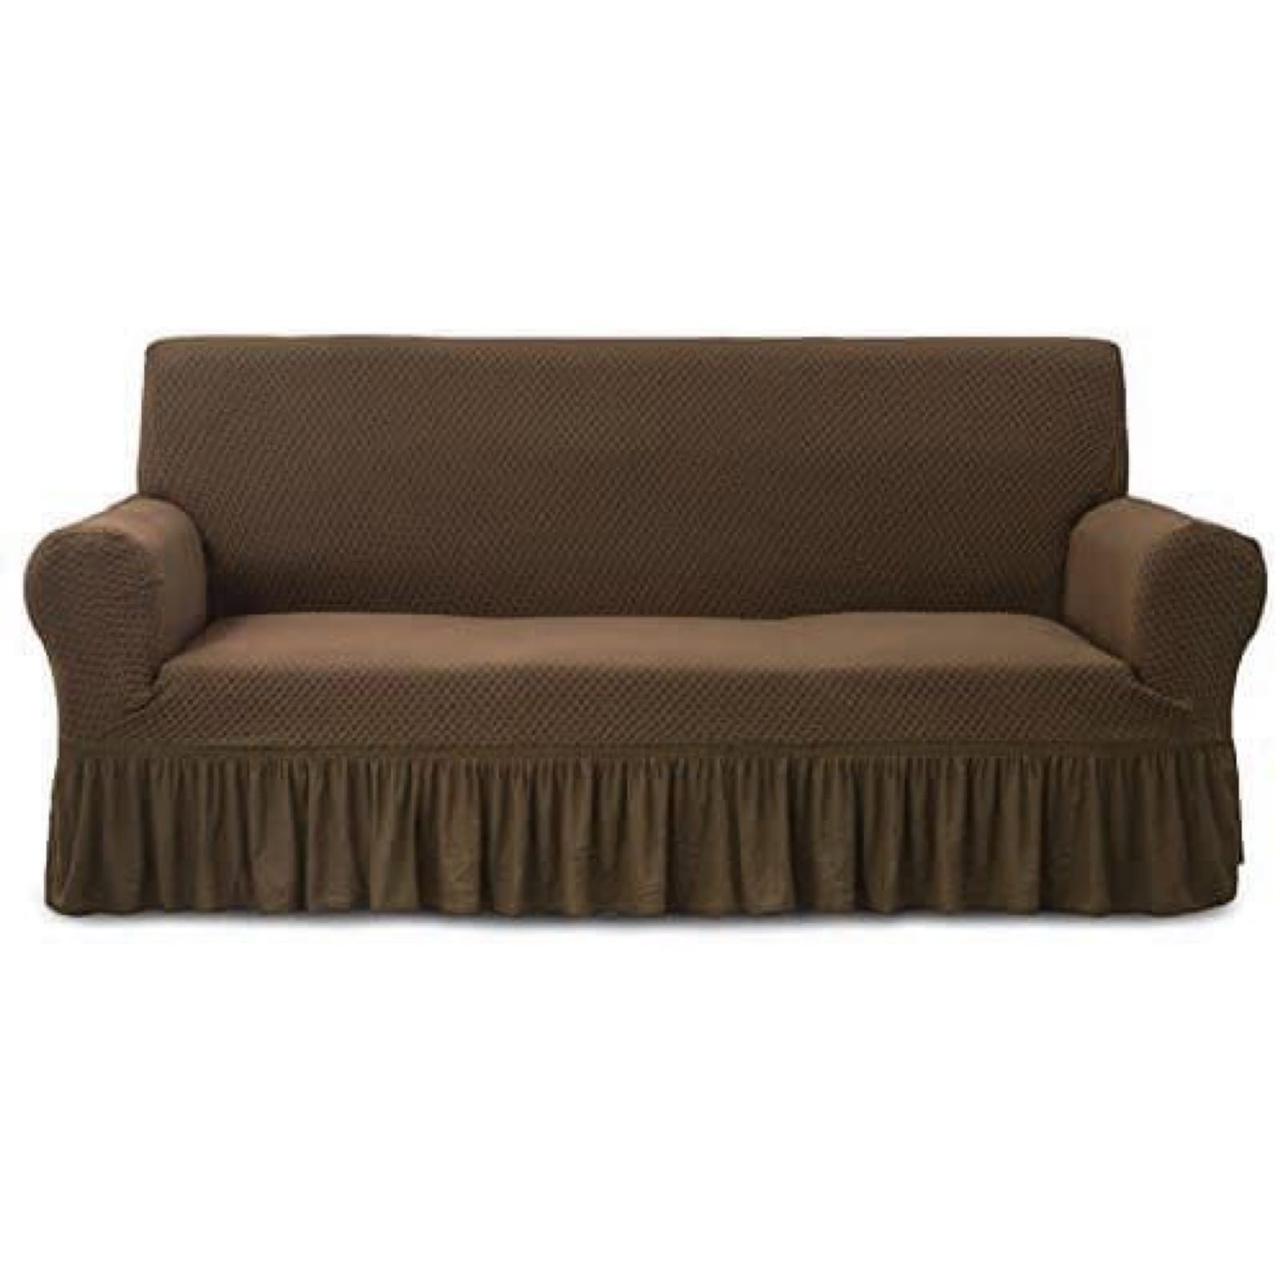 Turkish Style Sofa cover set (BROWN)